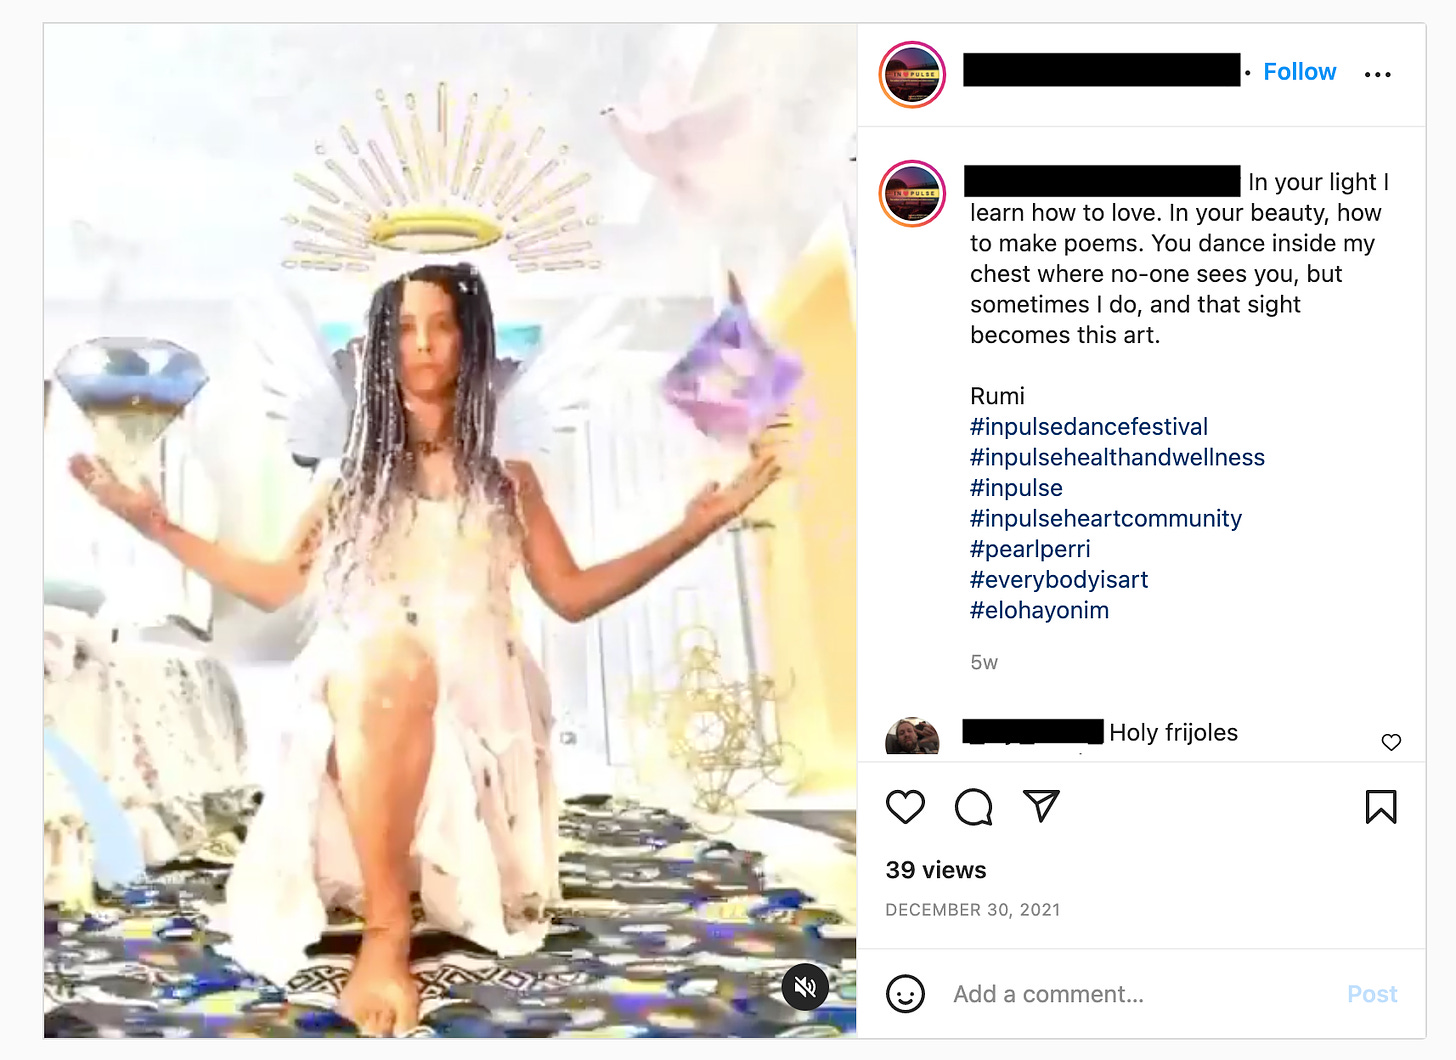 Screenshot of an instagram image of a white person with long dreadlocks on one knee with digital gems coming out of their hands and a halo on their head. The caption reads “in your light I learn how to love. In your beauty, how to make poems. You dance inside my chest where no-one sees you, but sometimes I do, and that sight becomes this art. Rumi”